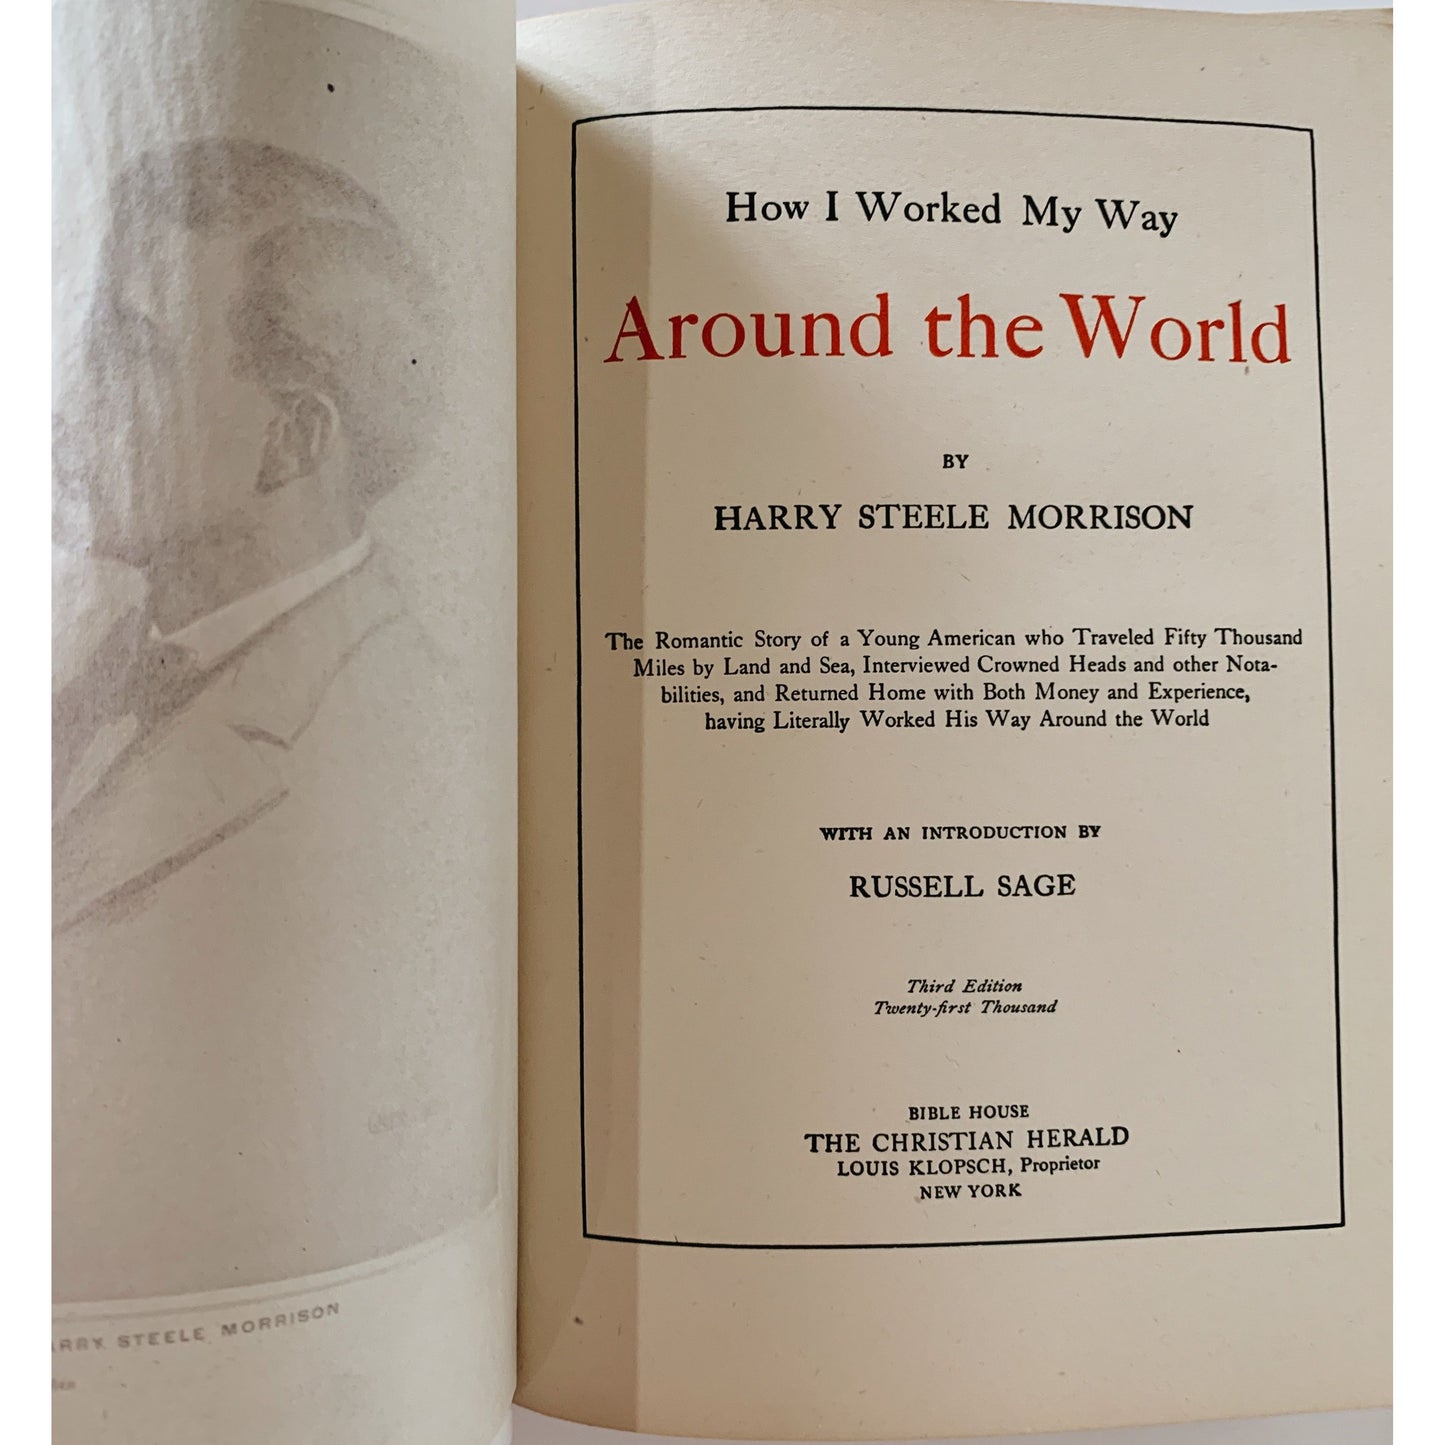 How I Worked My Way Around the World, 1903, Harry Steele Morrison